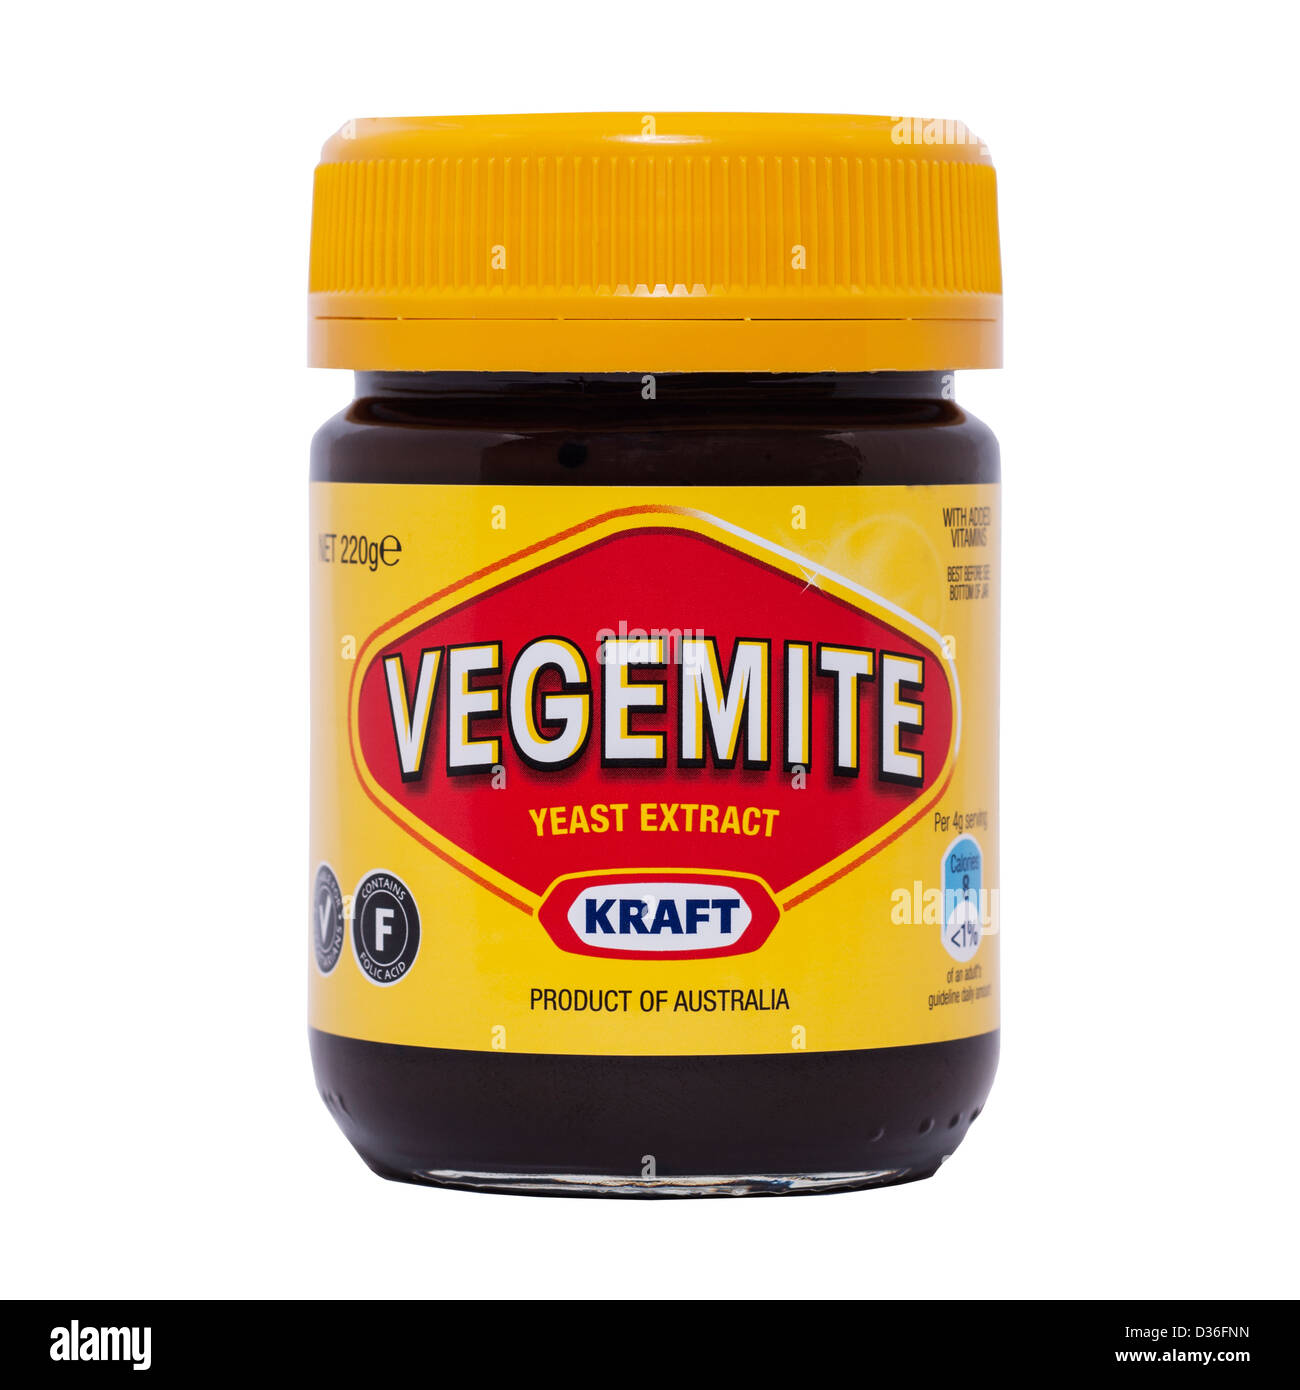 A jar of Vegemite yeast extract from Kraft on a white background Stock Photo